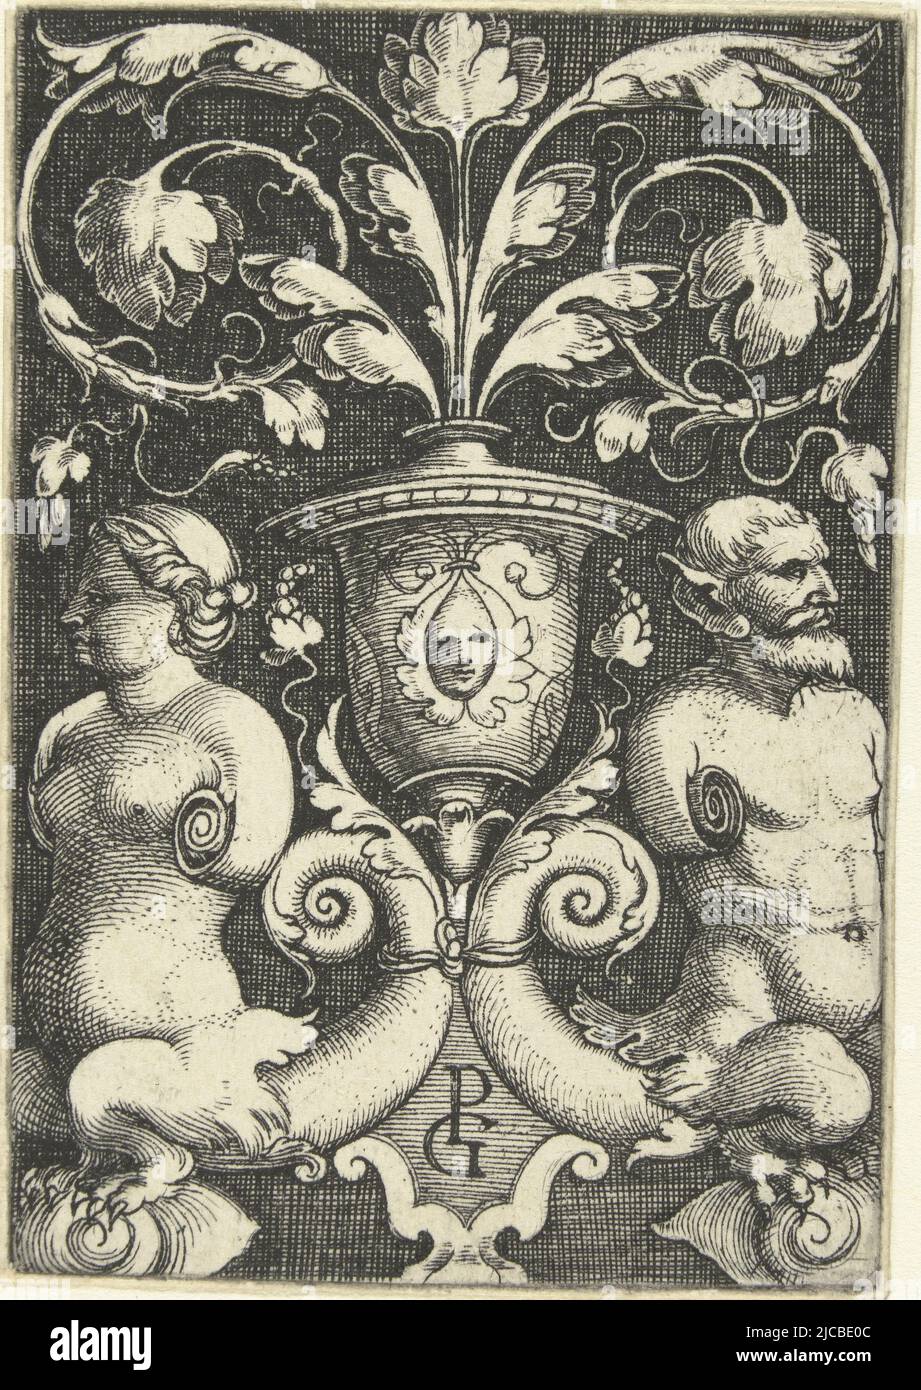 The nereid left and the triton right are seated on a snail on either side of a vase with leafy vines Shaded background One of two leaves, Nereid and a triton Plane decorations with grotesques and leafy vines , print maker: Georg Pencz, (mentioned on object), Georg Pencz, (mentioned on object), publisher: anonymous, Germany, (possibly), 1510 - 1550, paper, engraving, h 69 mm × w 47 mm Stock Photo